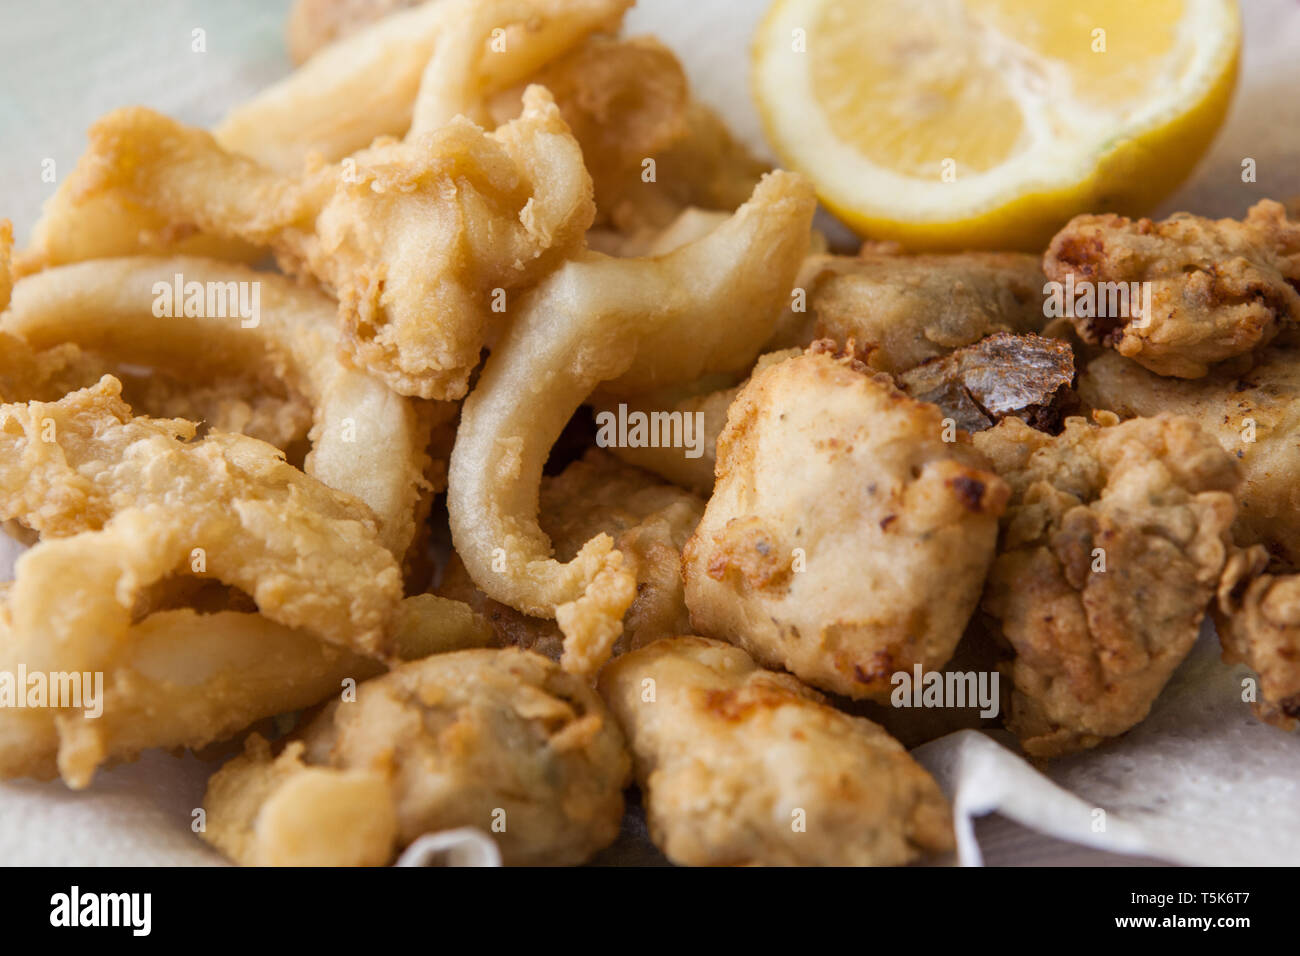 deep fried squid and fish on olive oil with lemon Stock Photo